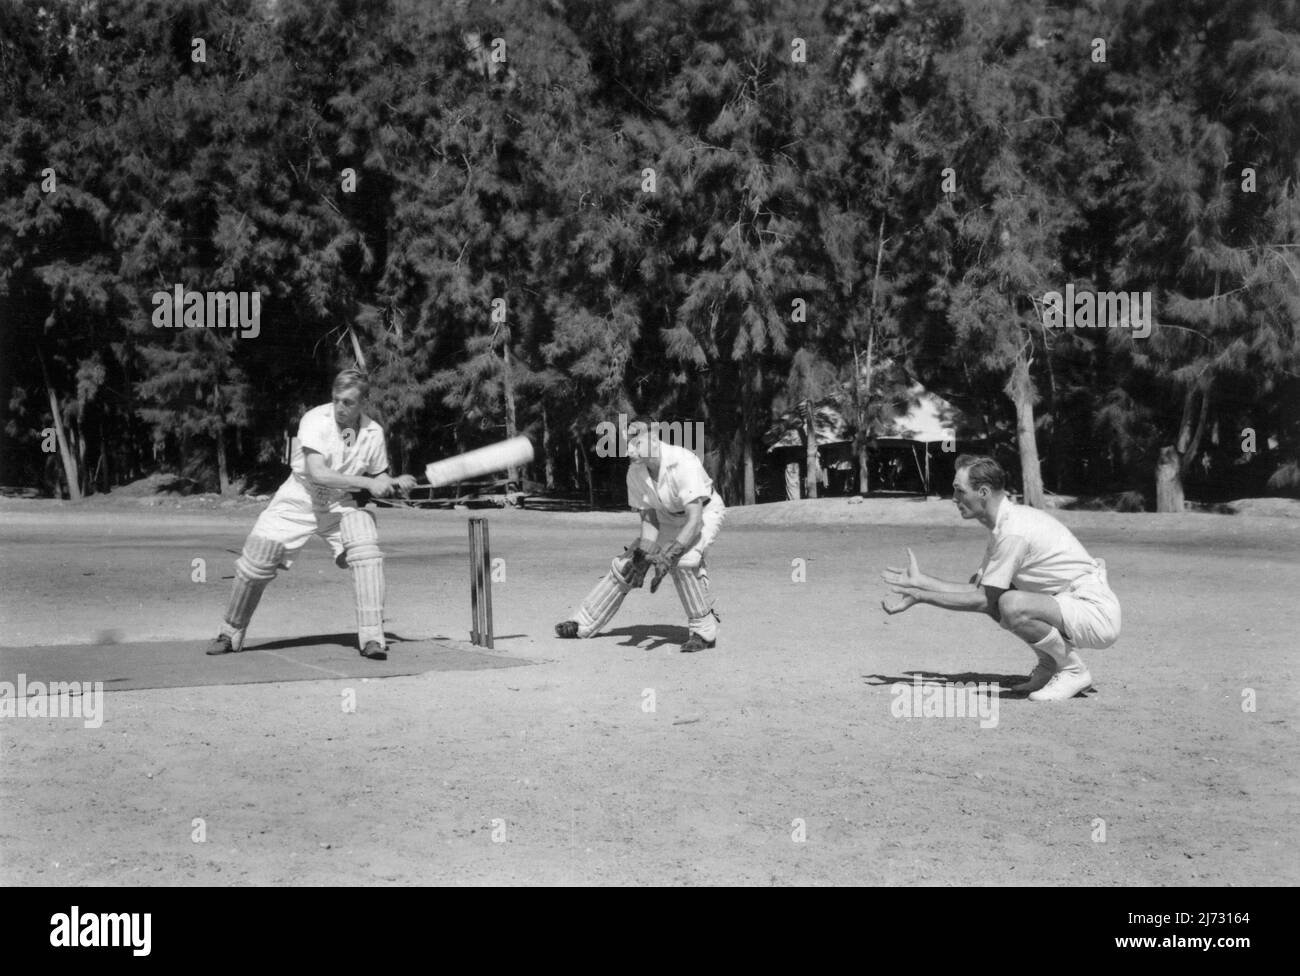 Military servicemen playing cricket on the sports ground at Timsah Rest Camp, Ismailia, Egypt. c.1950. This camp offered rest and recreation for British soldiers garrisoned at bases in the Suez Canal Zone. Stock Photo